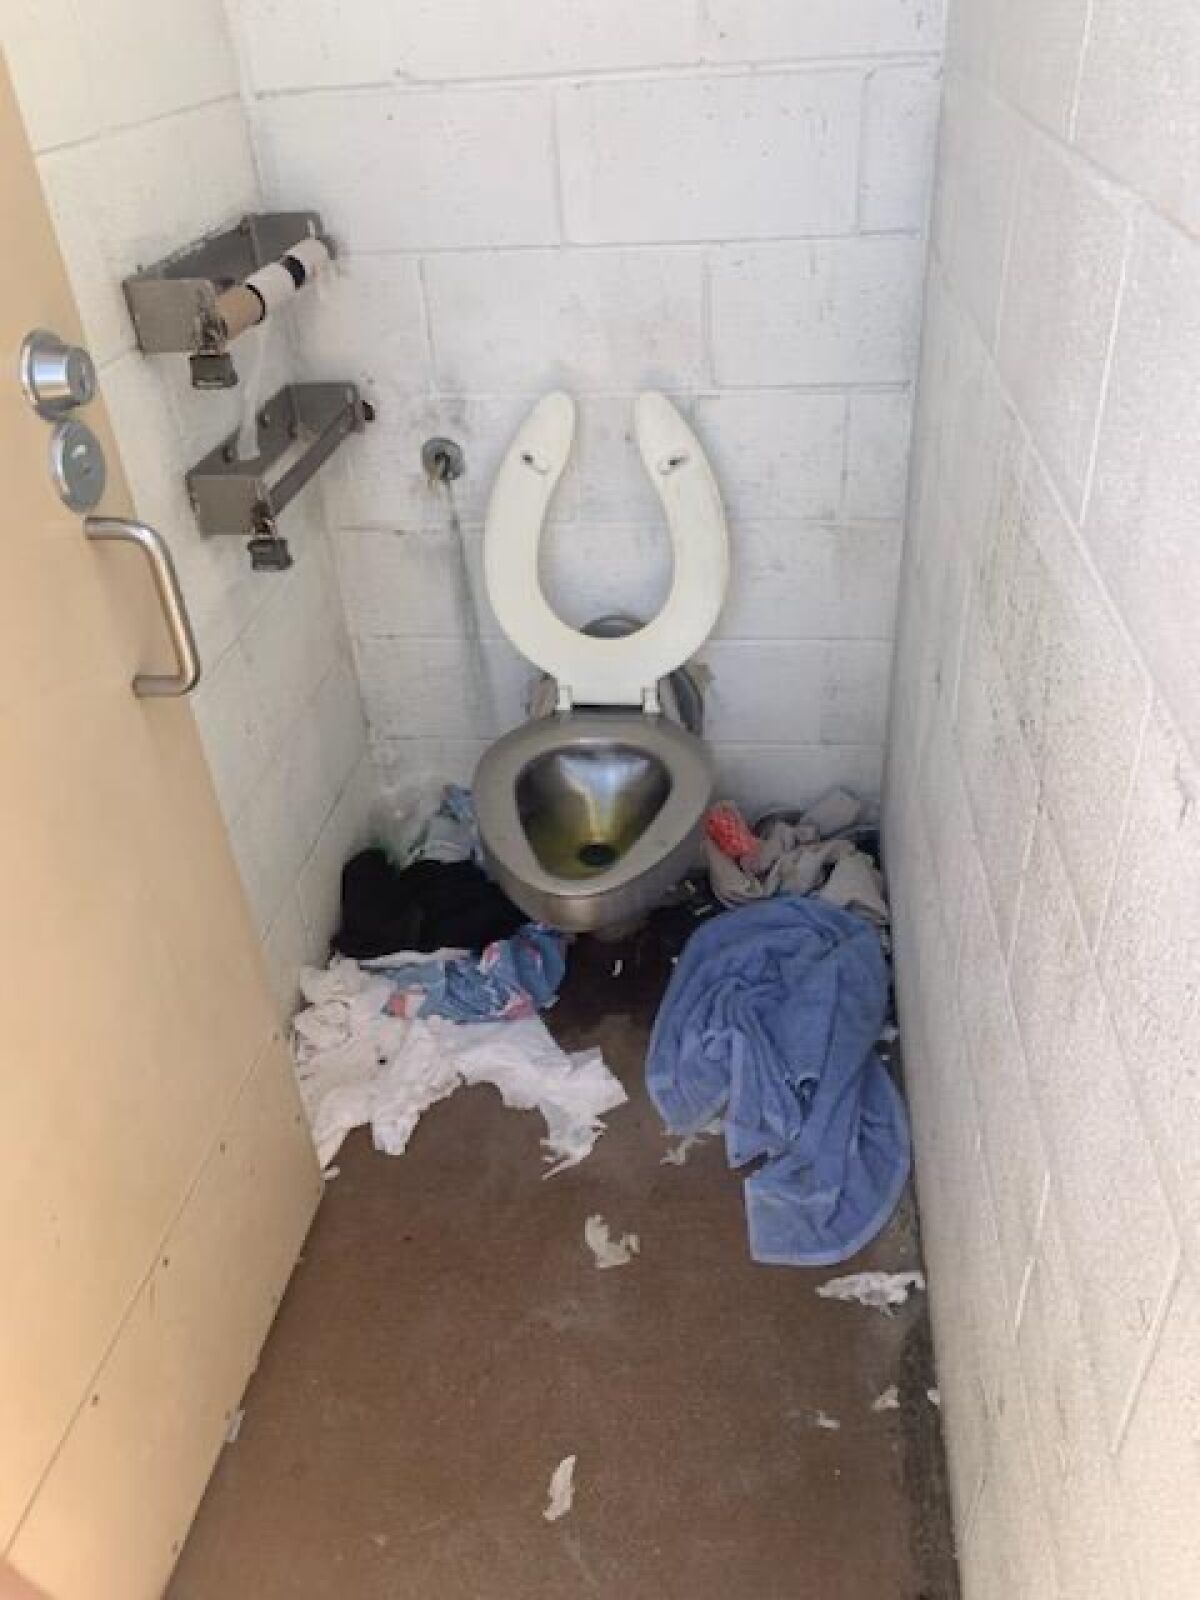 The south restroom facility at La Jolla Shores' Kellogg Park drew complaints recently about unsanitary conditions.